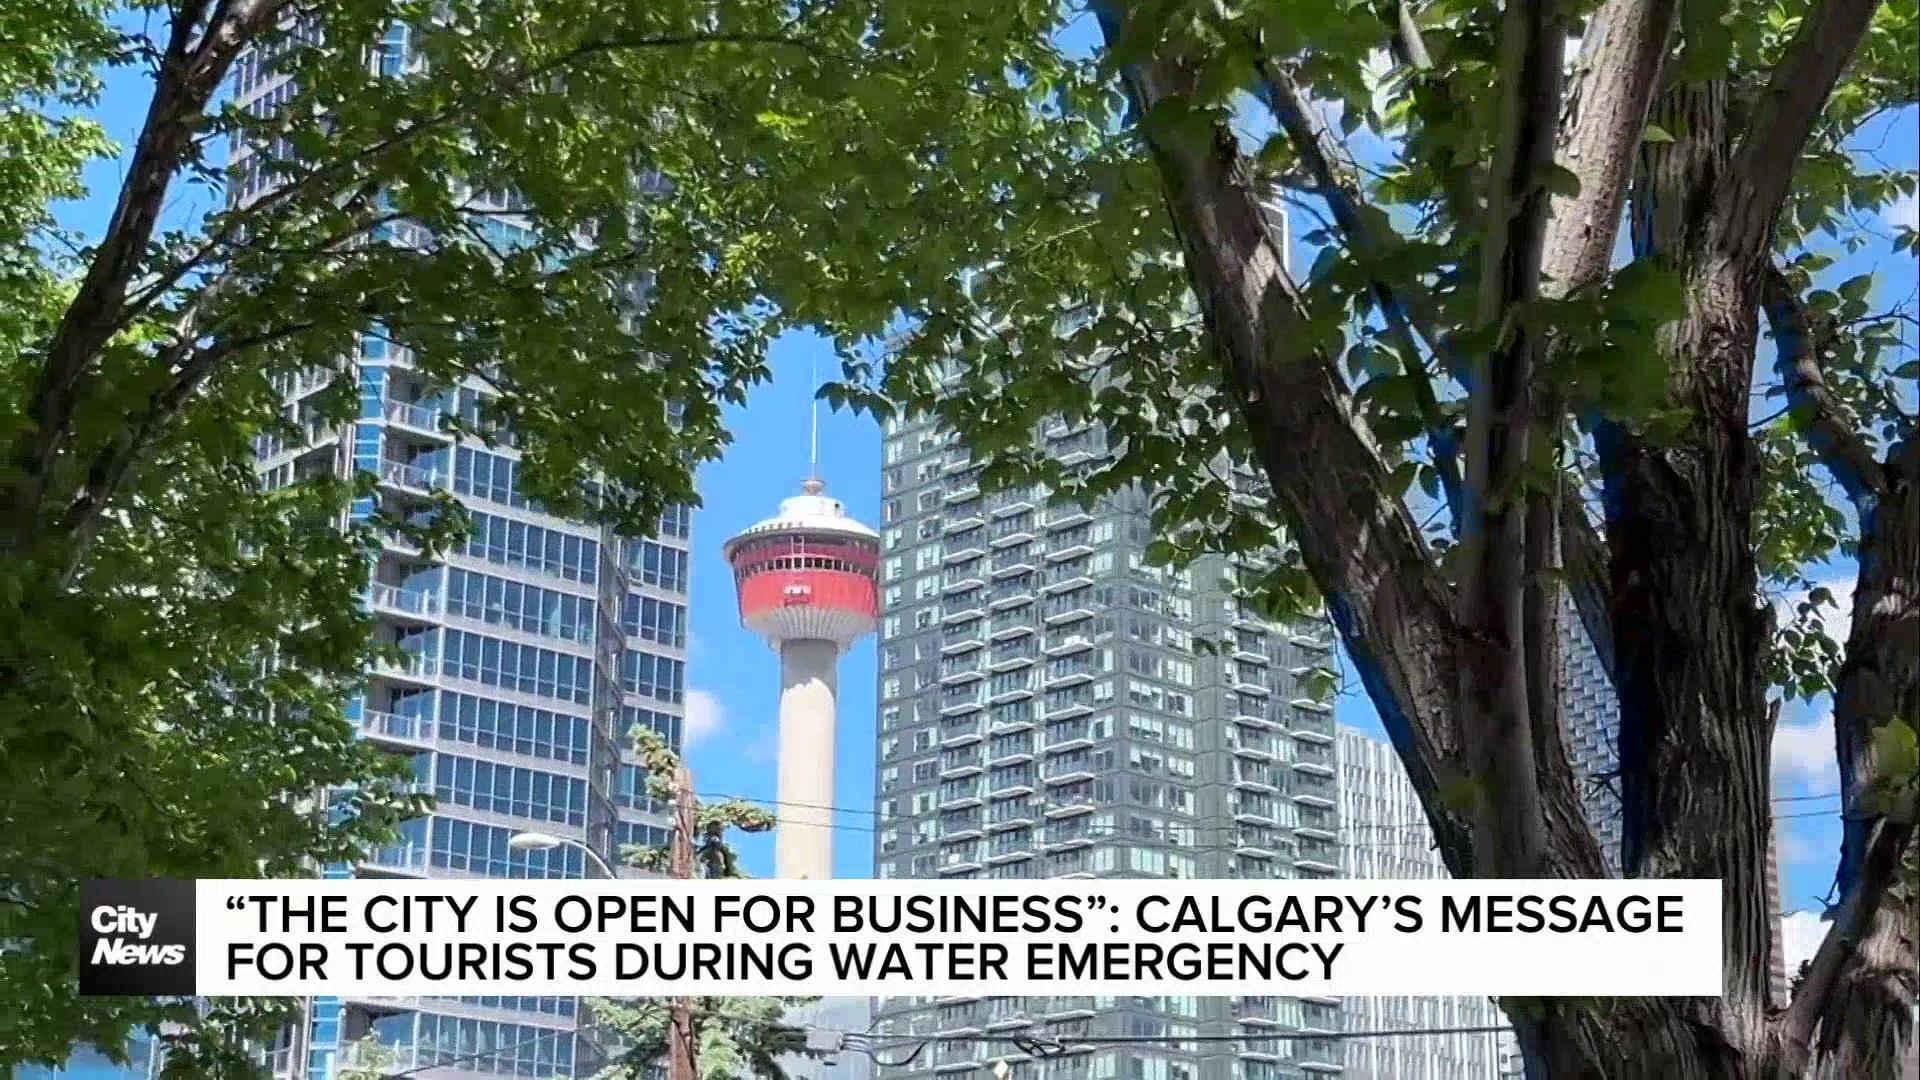 "The city is open for business": Calgary's message for tourists during water emergency